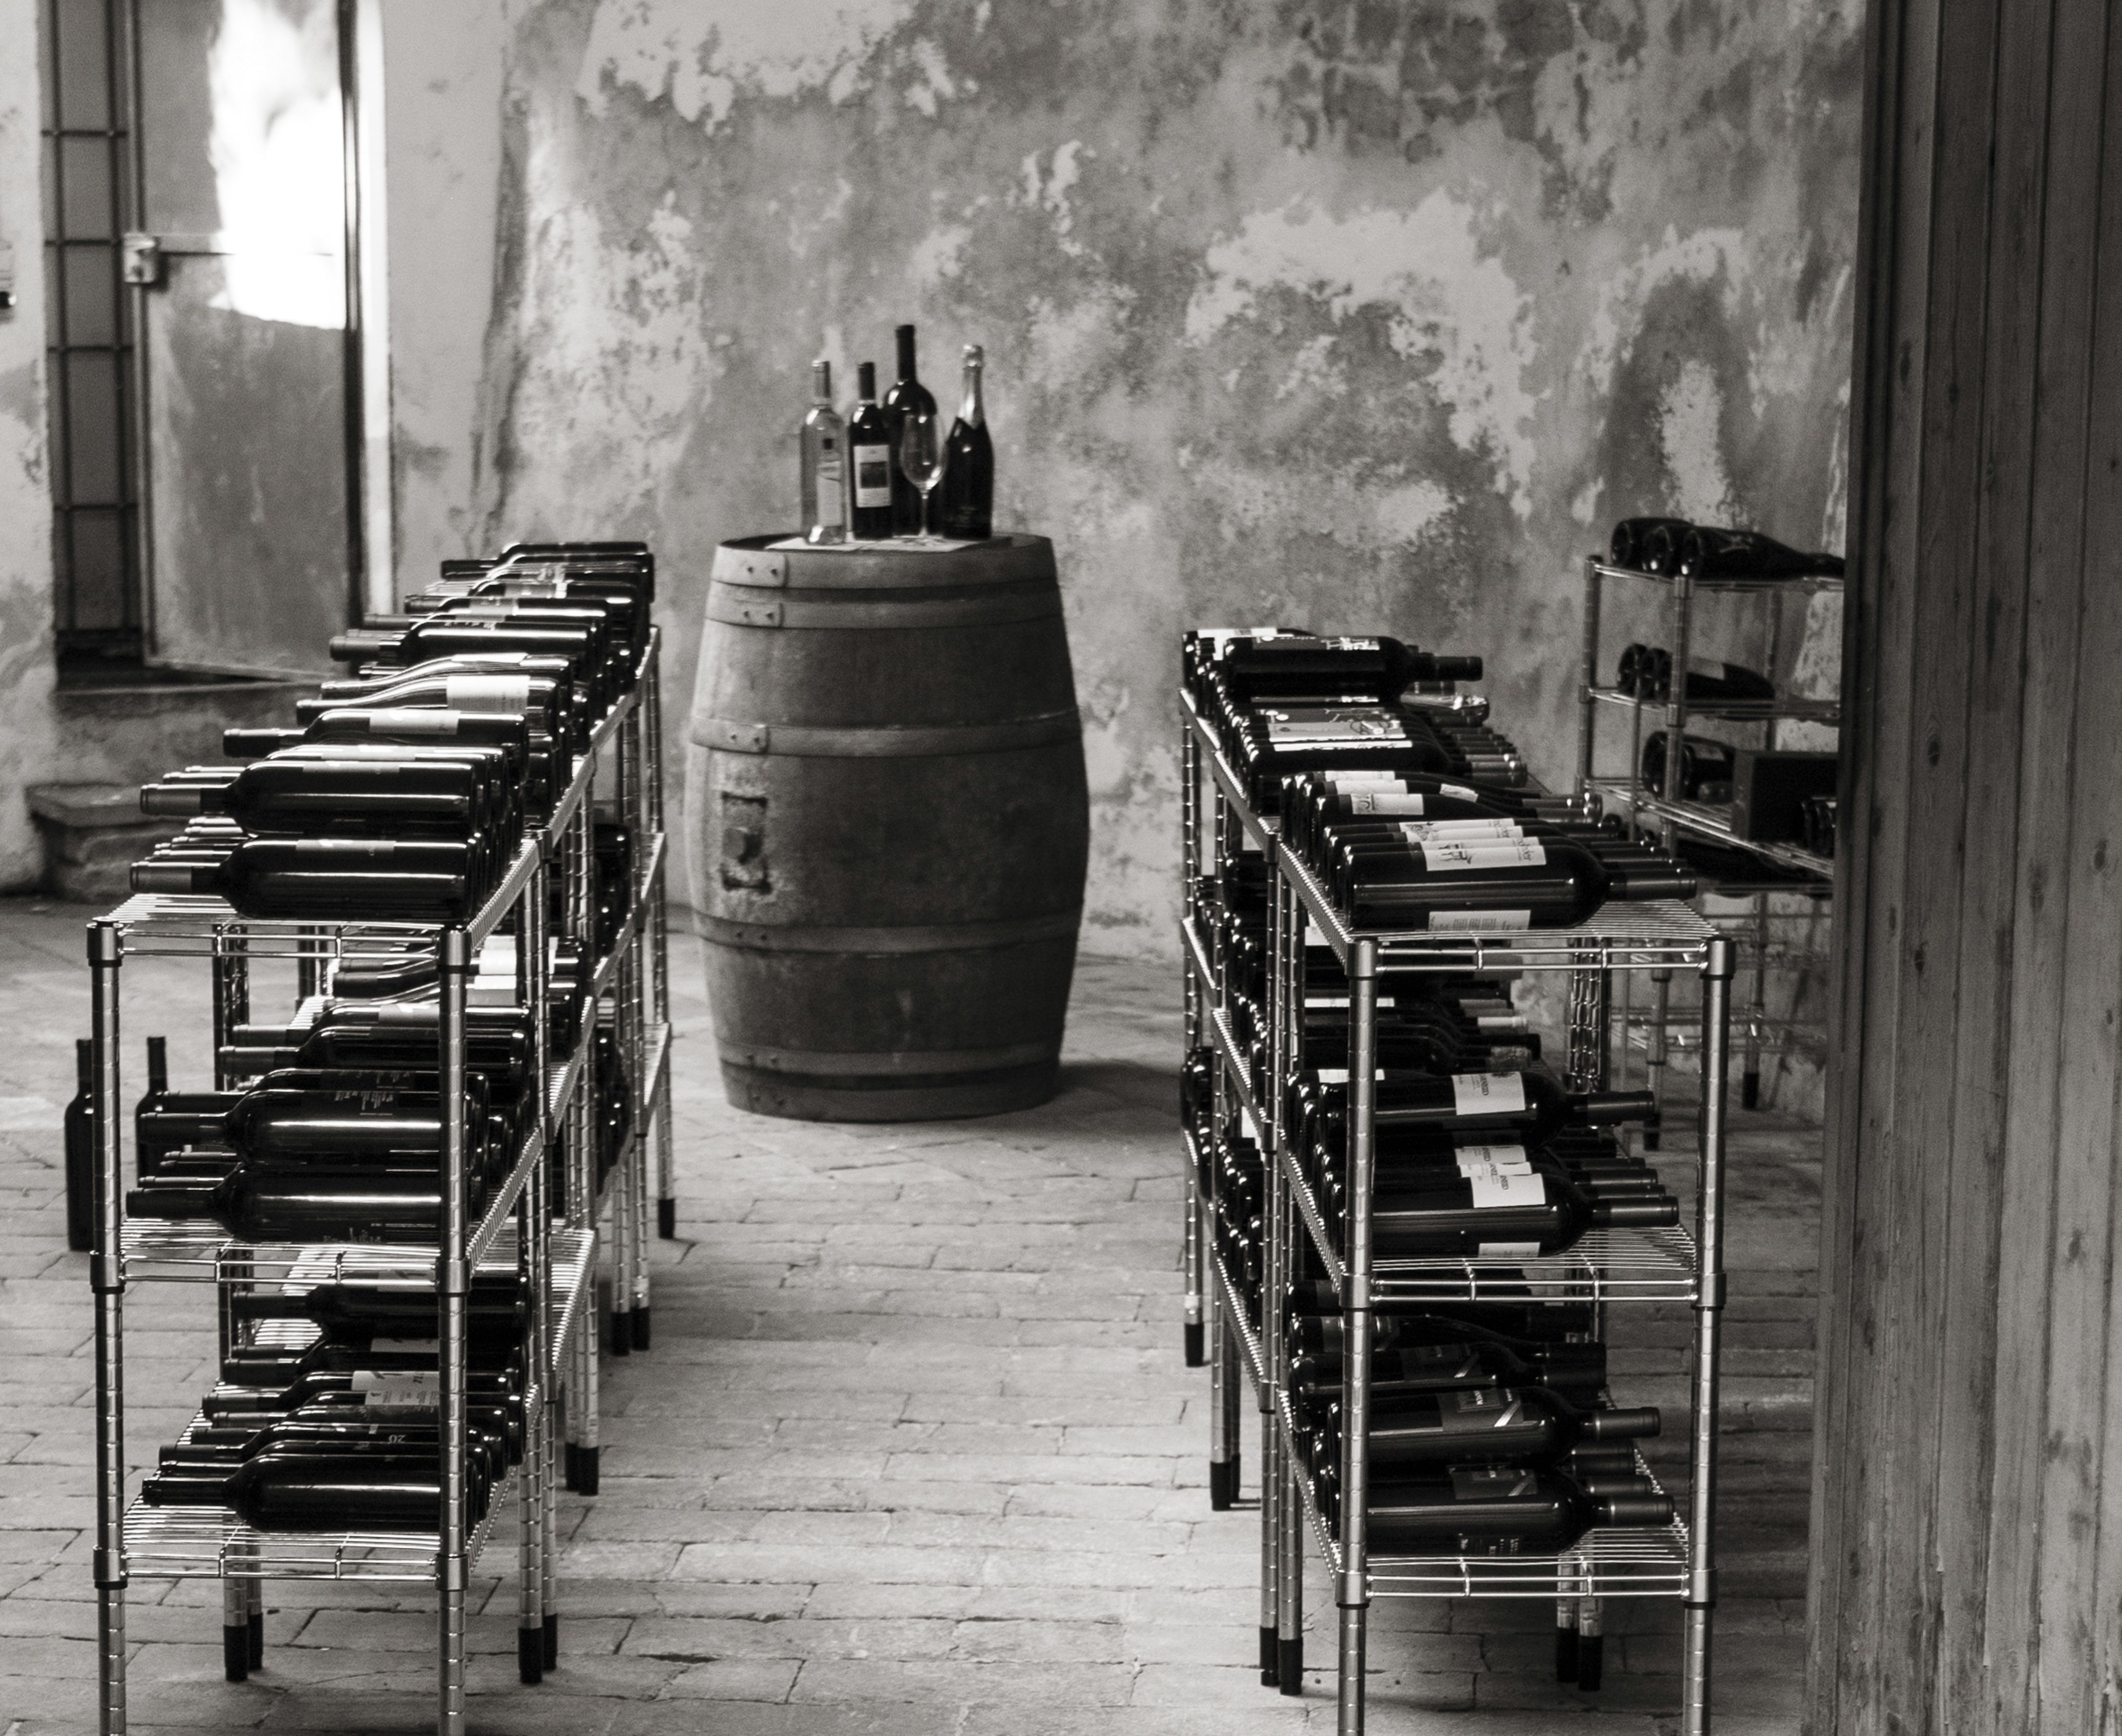 this is a black and white image of a wine cellar in a villa in the emilia romagna region of northern italy showing locally produced wines stored on stainless steel racks and a used wine cask used for tasting